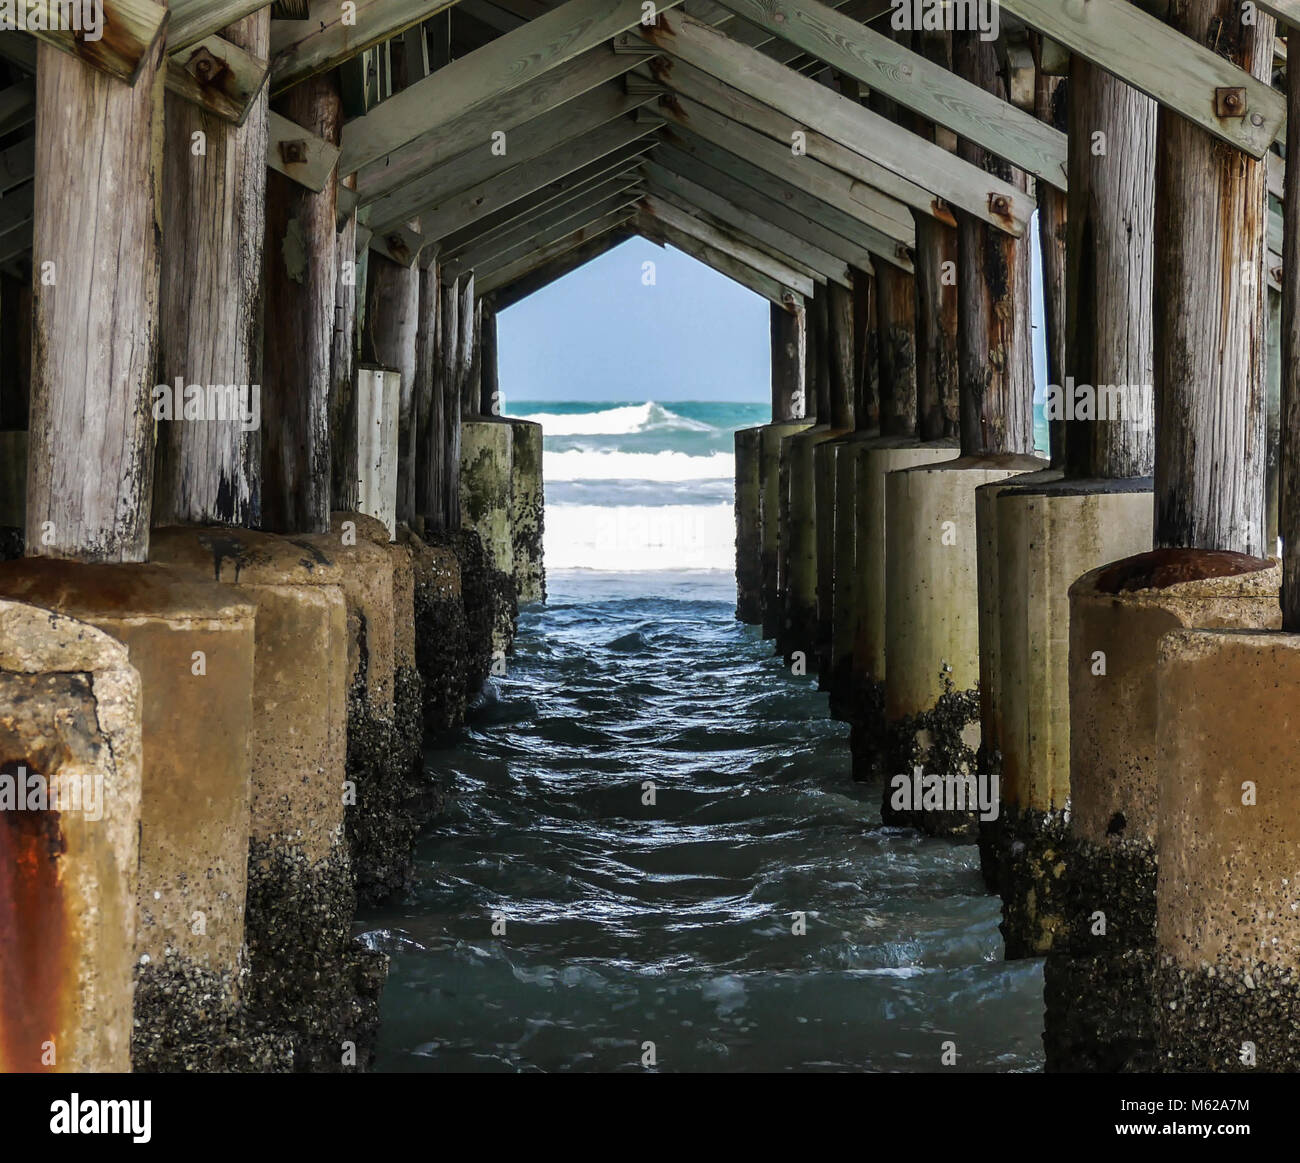 Peering through an archway under a pier seeing waves crashing in the ocean. Stock Photo